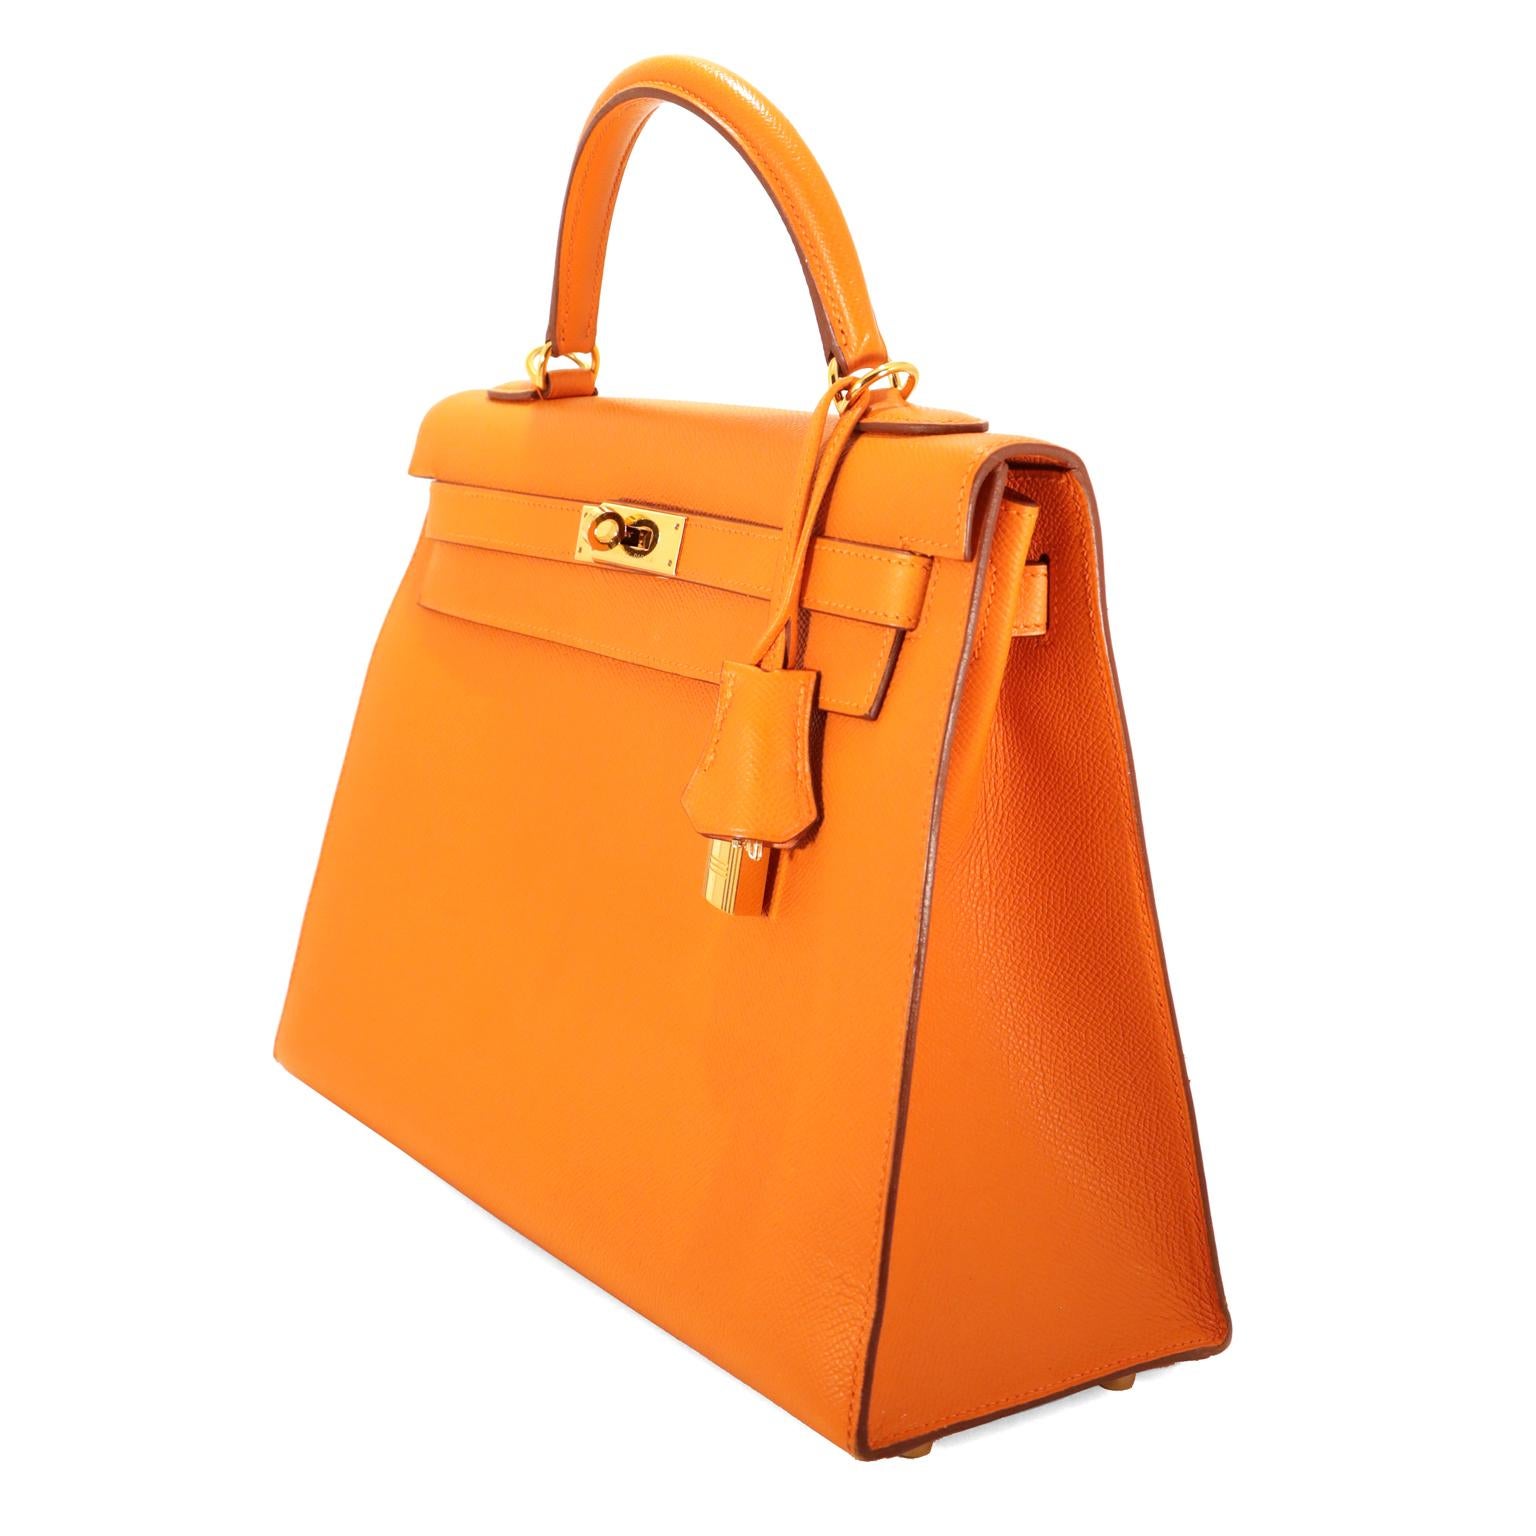 This authentic Hermès Orange Epsom 32 cm Kelly Sellier is in pristine condition.  Hermès bags are considered the ultimate luxury item worldwide.  Each piece is handcrafted with waitlists that can exceed a year or more.  The ladylike Kelly is classic